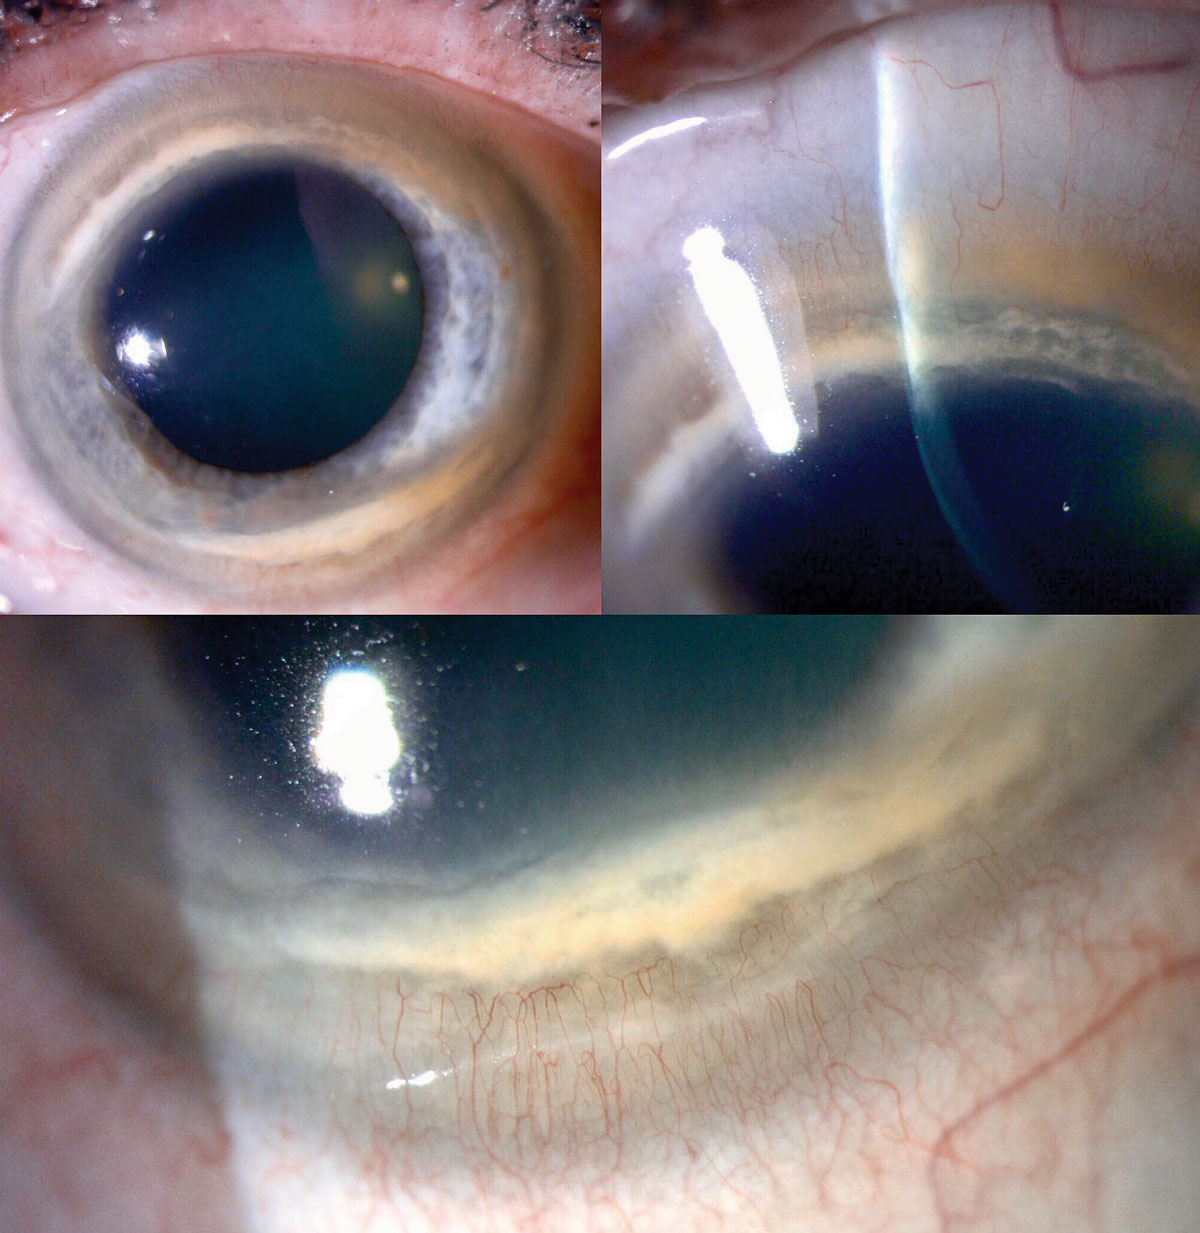 Case 2. Slit lamp exam showed paralimbal corneal thinning with neovascularization and lipid deposits bilaterally.